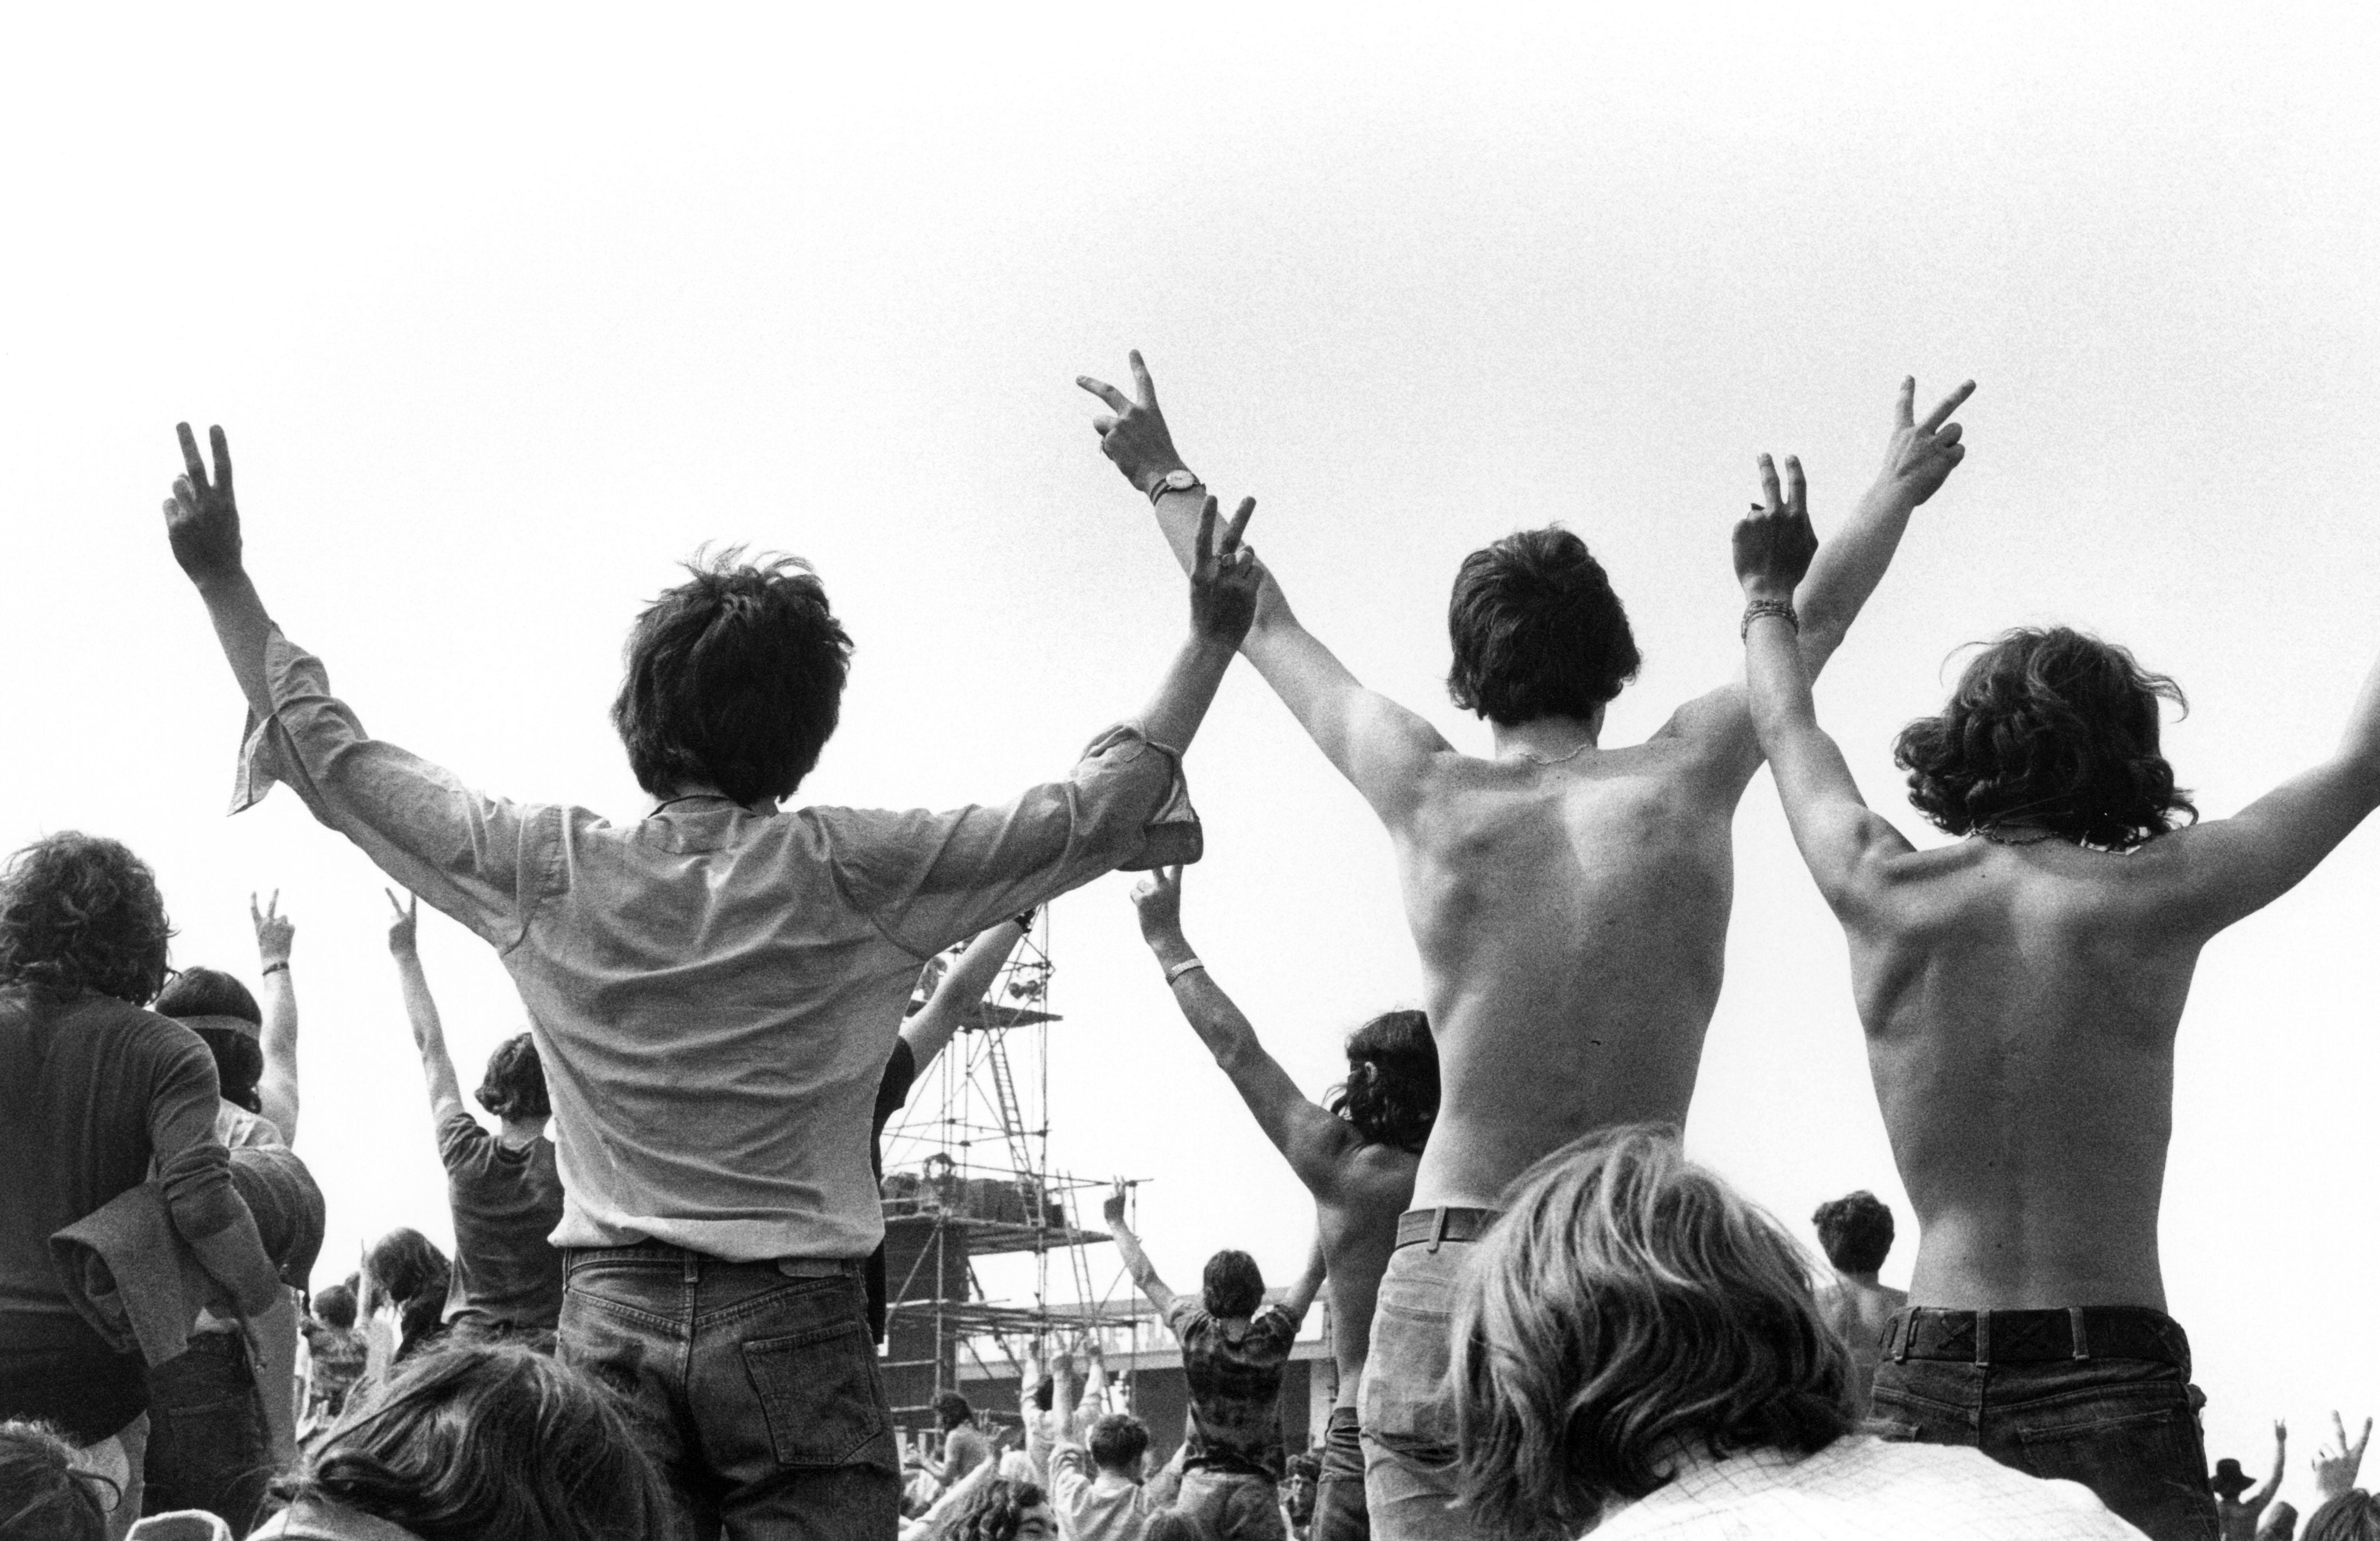 A crowd of people at a festival - we can see their backs as they face towards the stage. Some young men are sitting on the shoulders of others, making peace signs with their hands